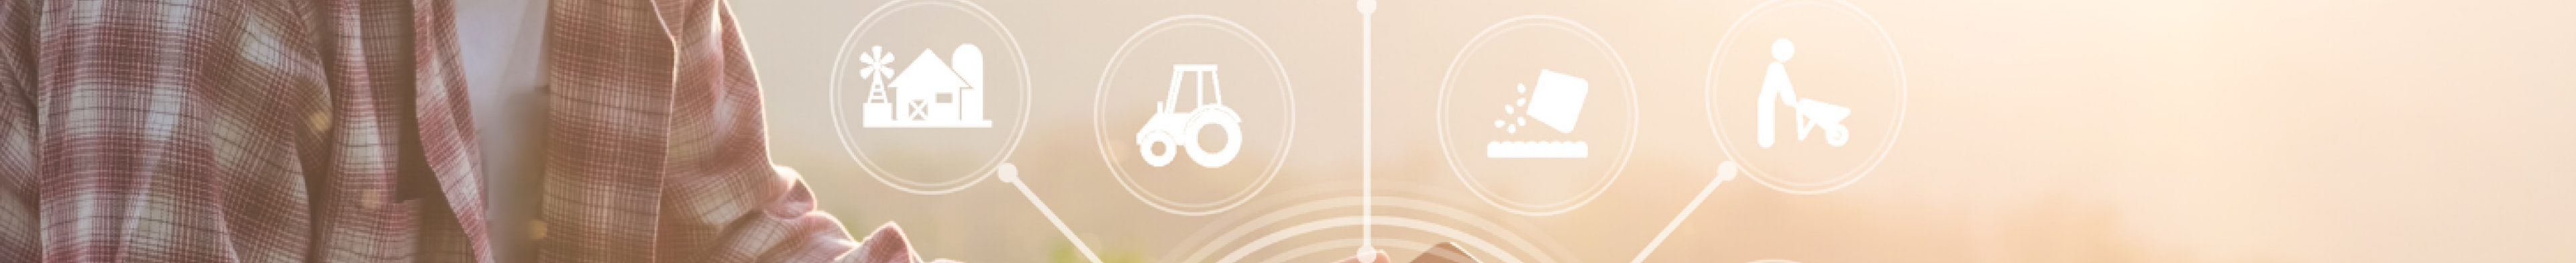 banner-agritech_1.png